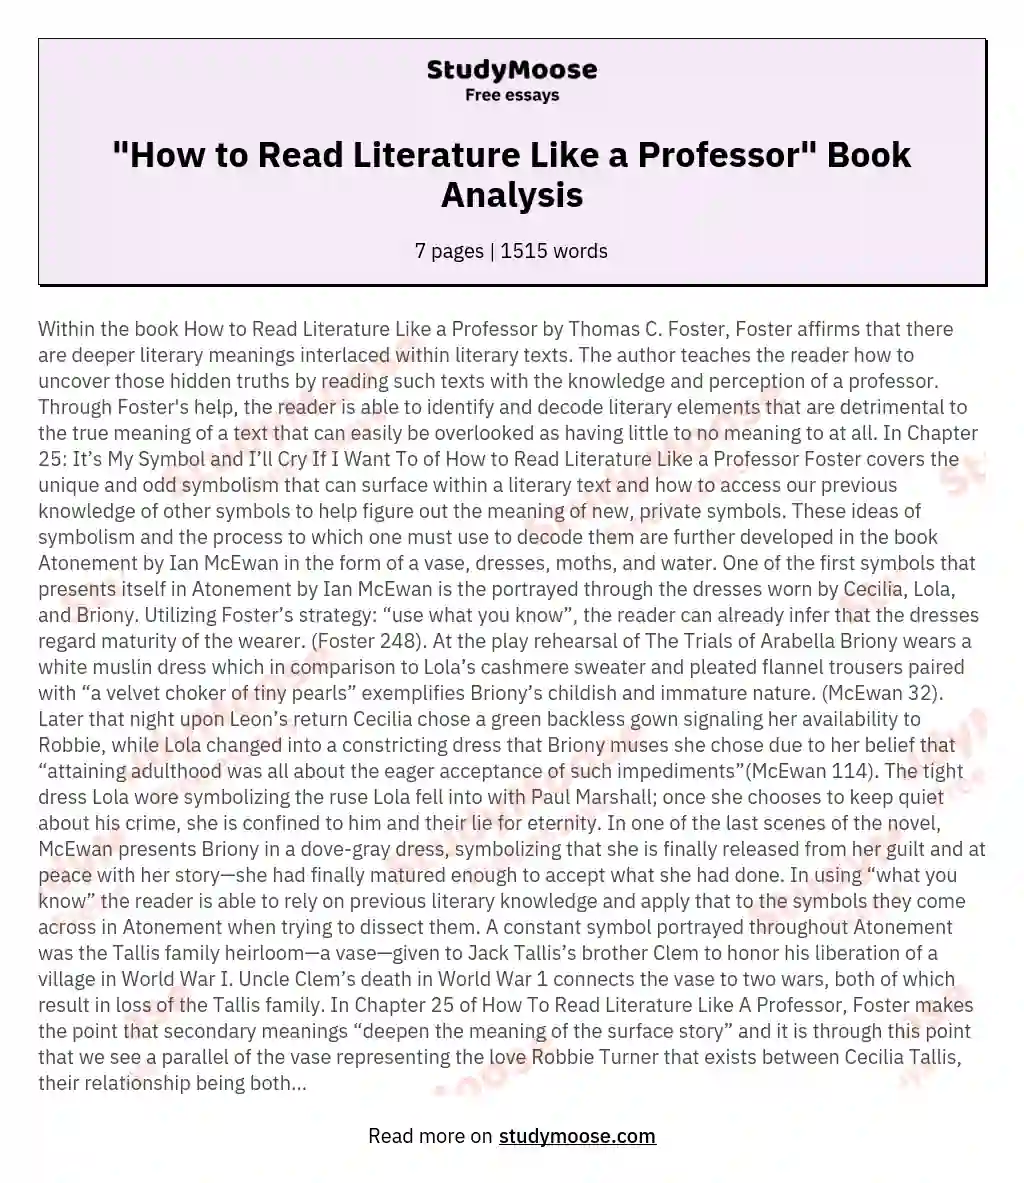 "How to Read Literature Like a Professor" Book Analysis essay